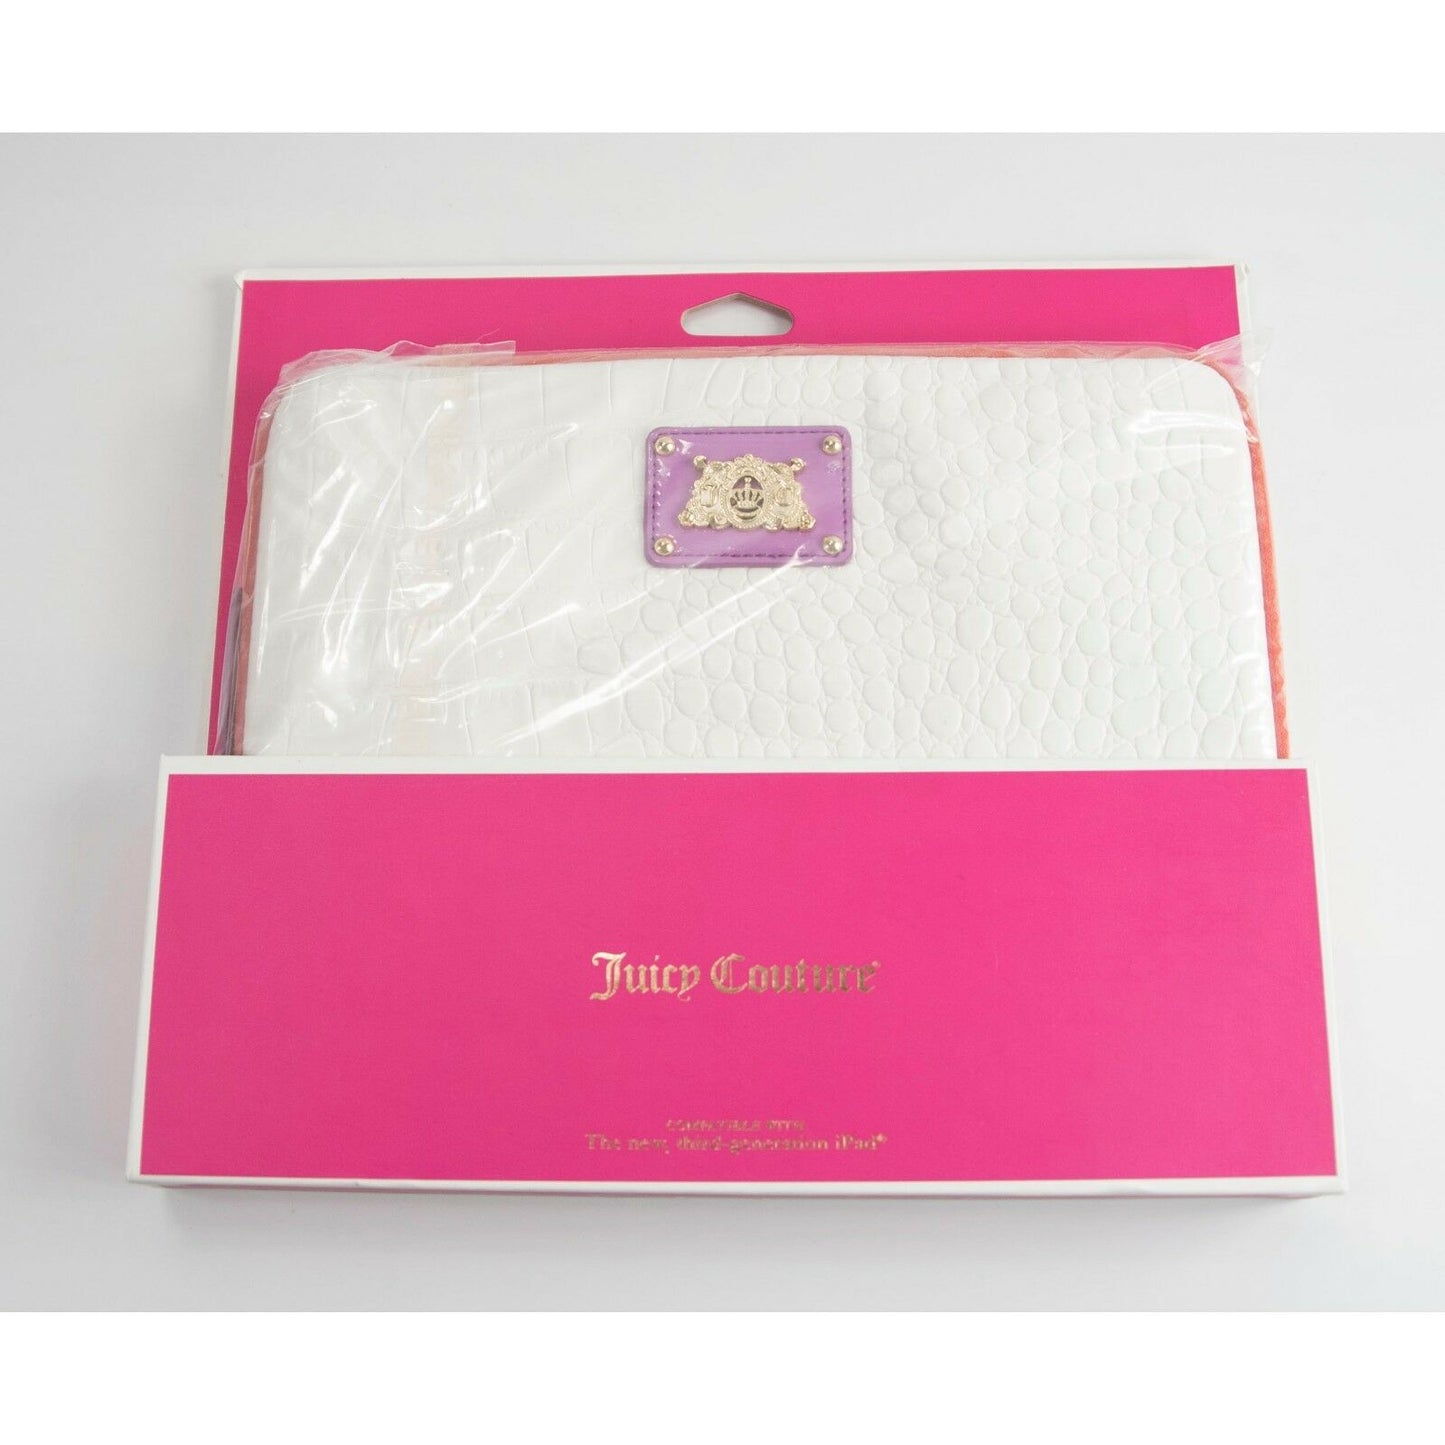 Juicy Couture White Croc Faux Leather Zip Around Tablet iPad Case Sleeve